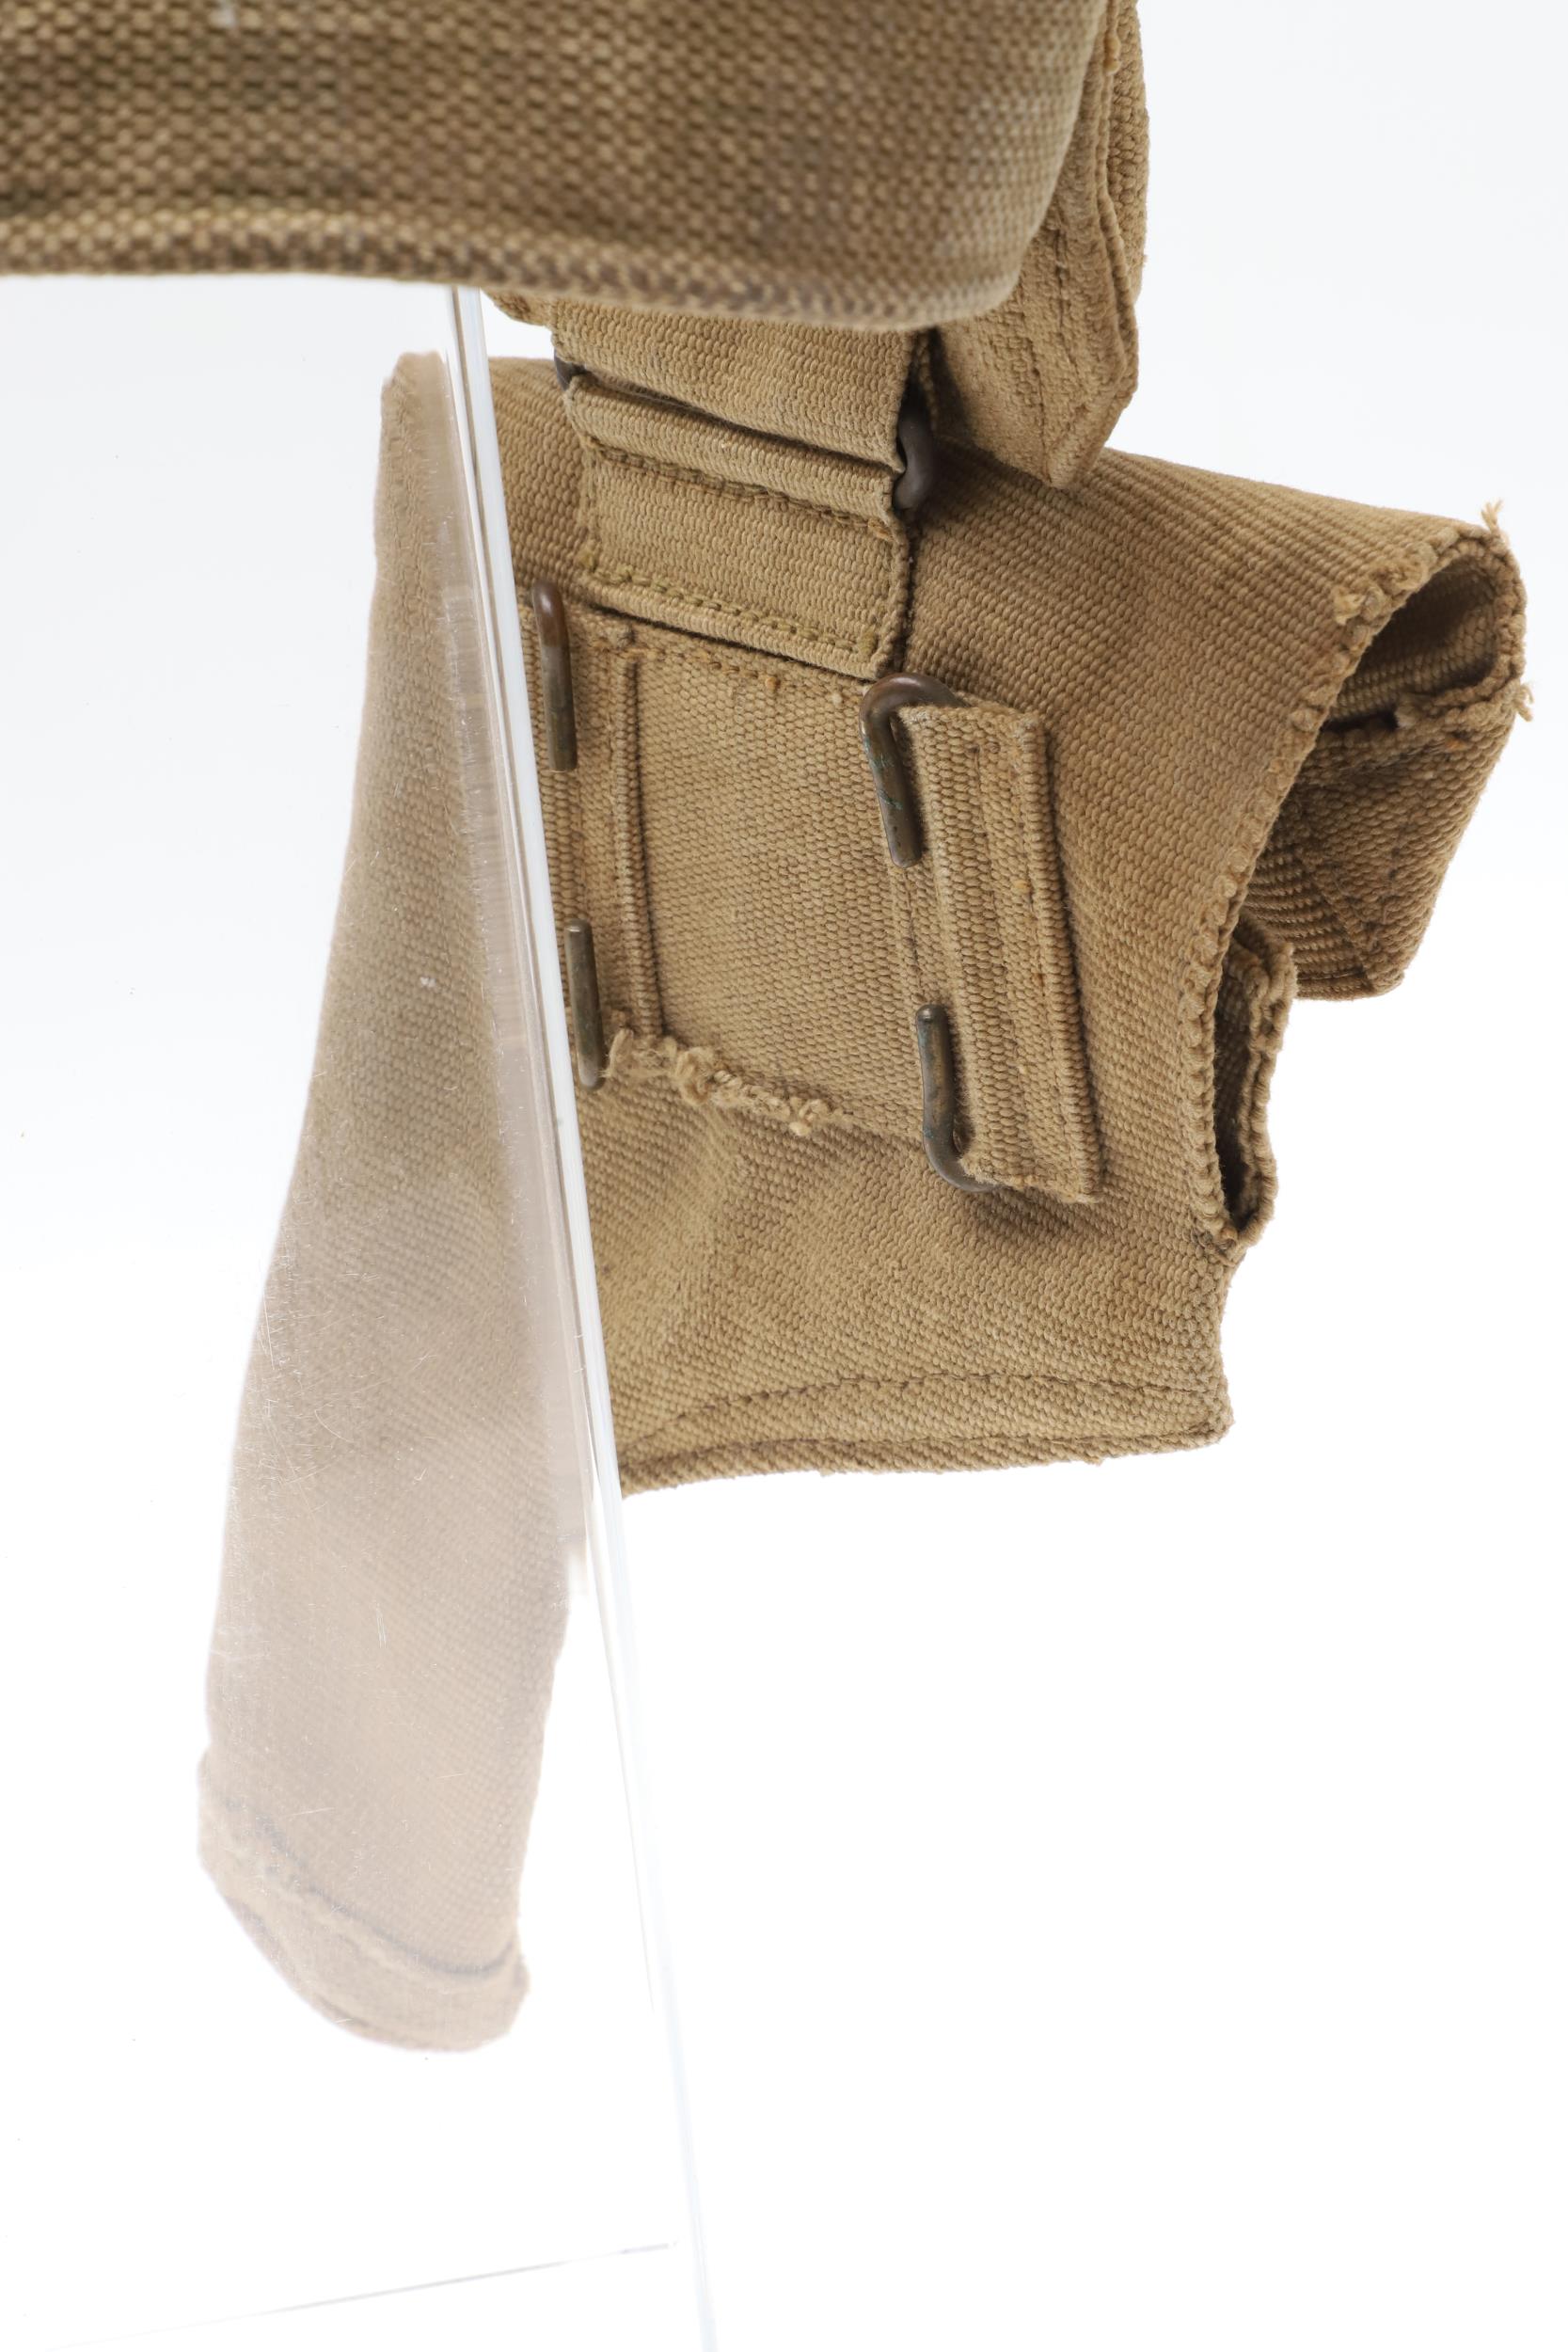 A 1937 PATTERN WEBBING HOLSTER, POUCH AND BELT. - Image 6 of 8